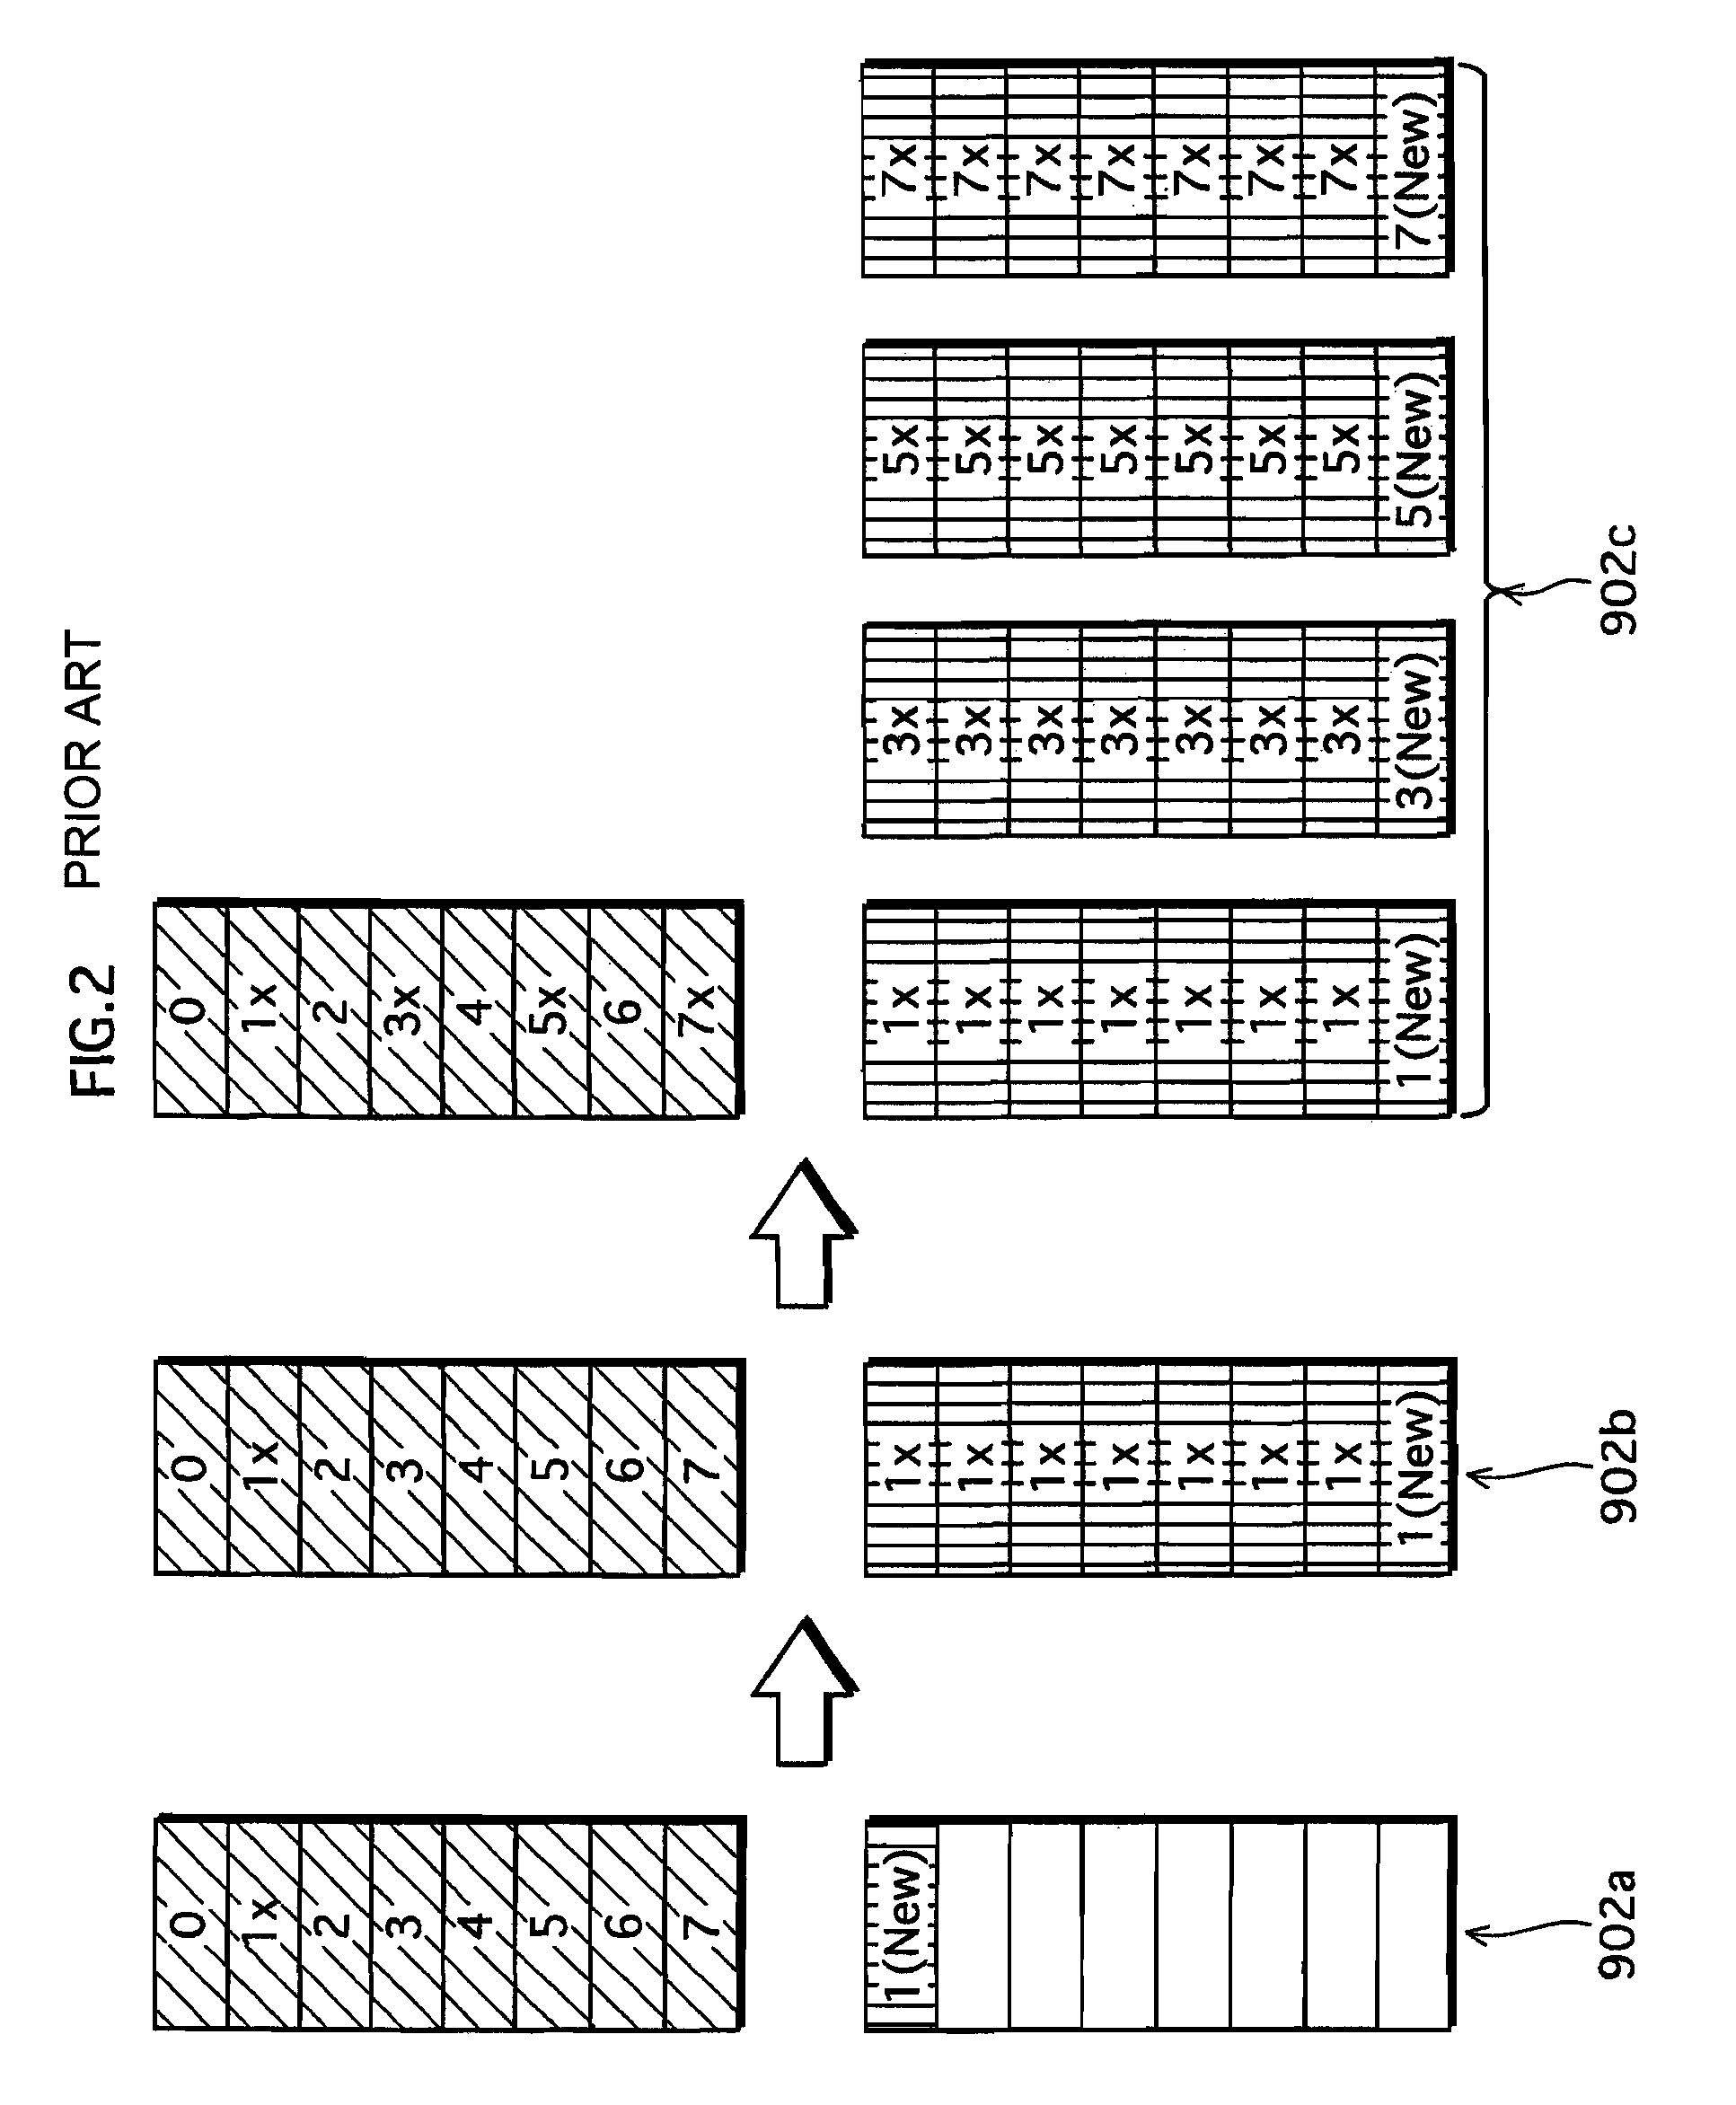 Memory card able to guarantee a recoding rate and memory card system using the memory card